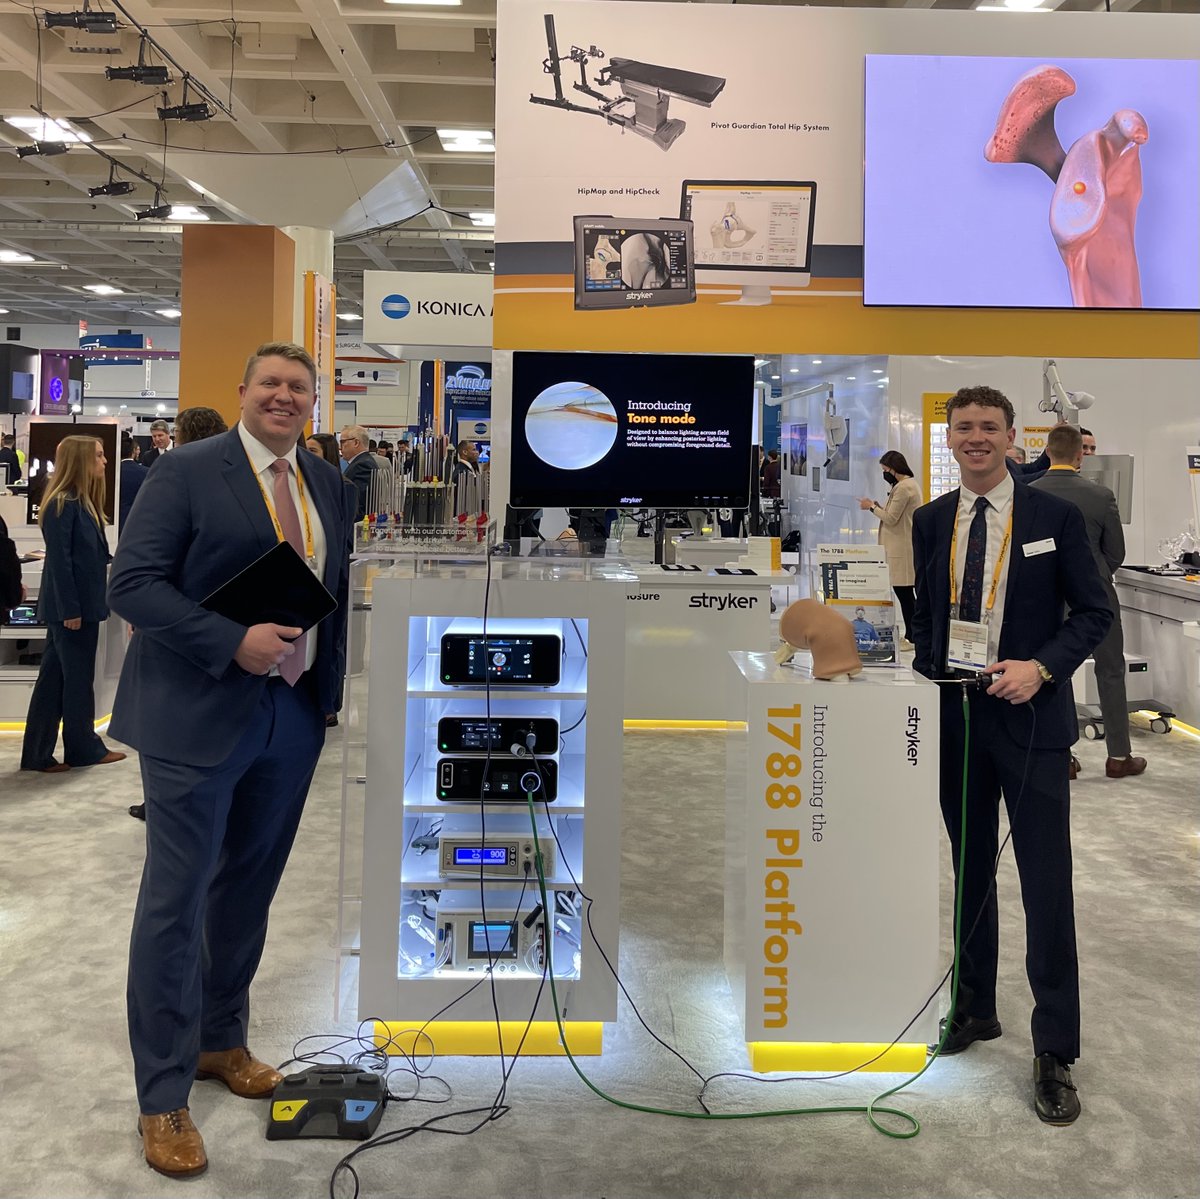 Welcome to San Francisco, AAOS attendees! Stop by booth #5945 to learn more about the use of the 1788 Platform in orthopaedic surgery. We can't wait to meet you here! #AAOS24